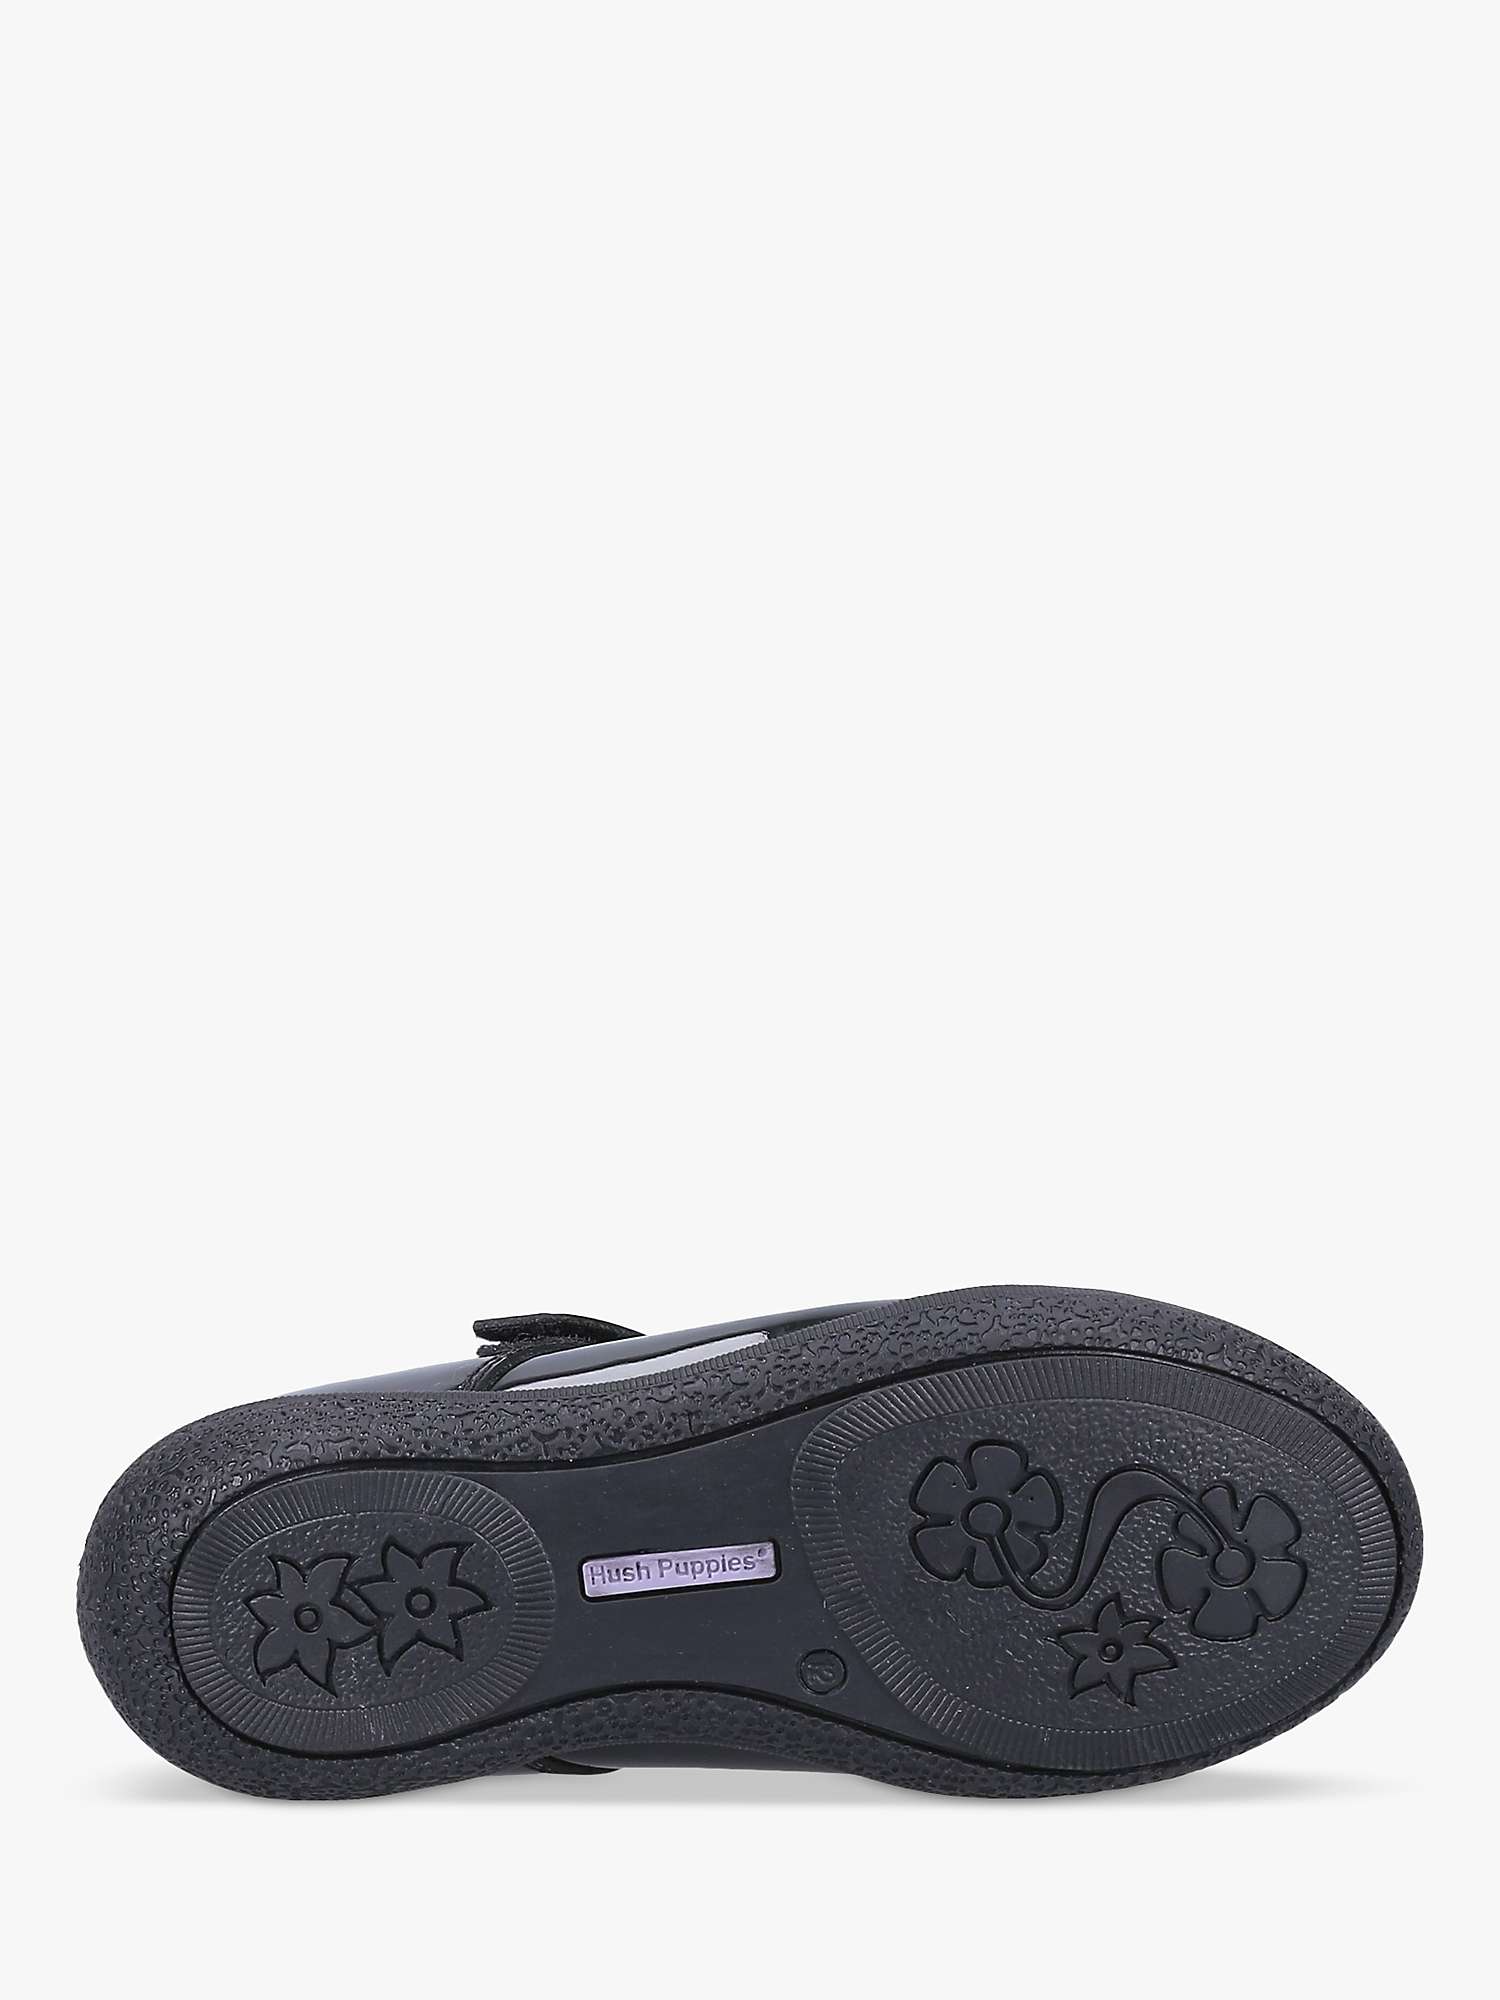 Buy Hush Puppies Kids' Rosanna Leather Mary Jane School Shoes, Black Online at johnlewis.com